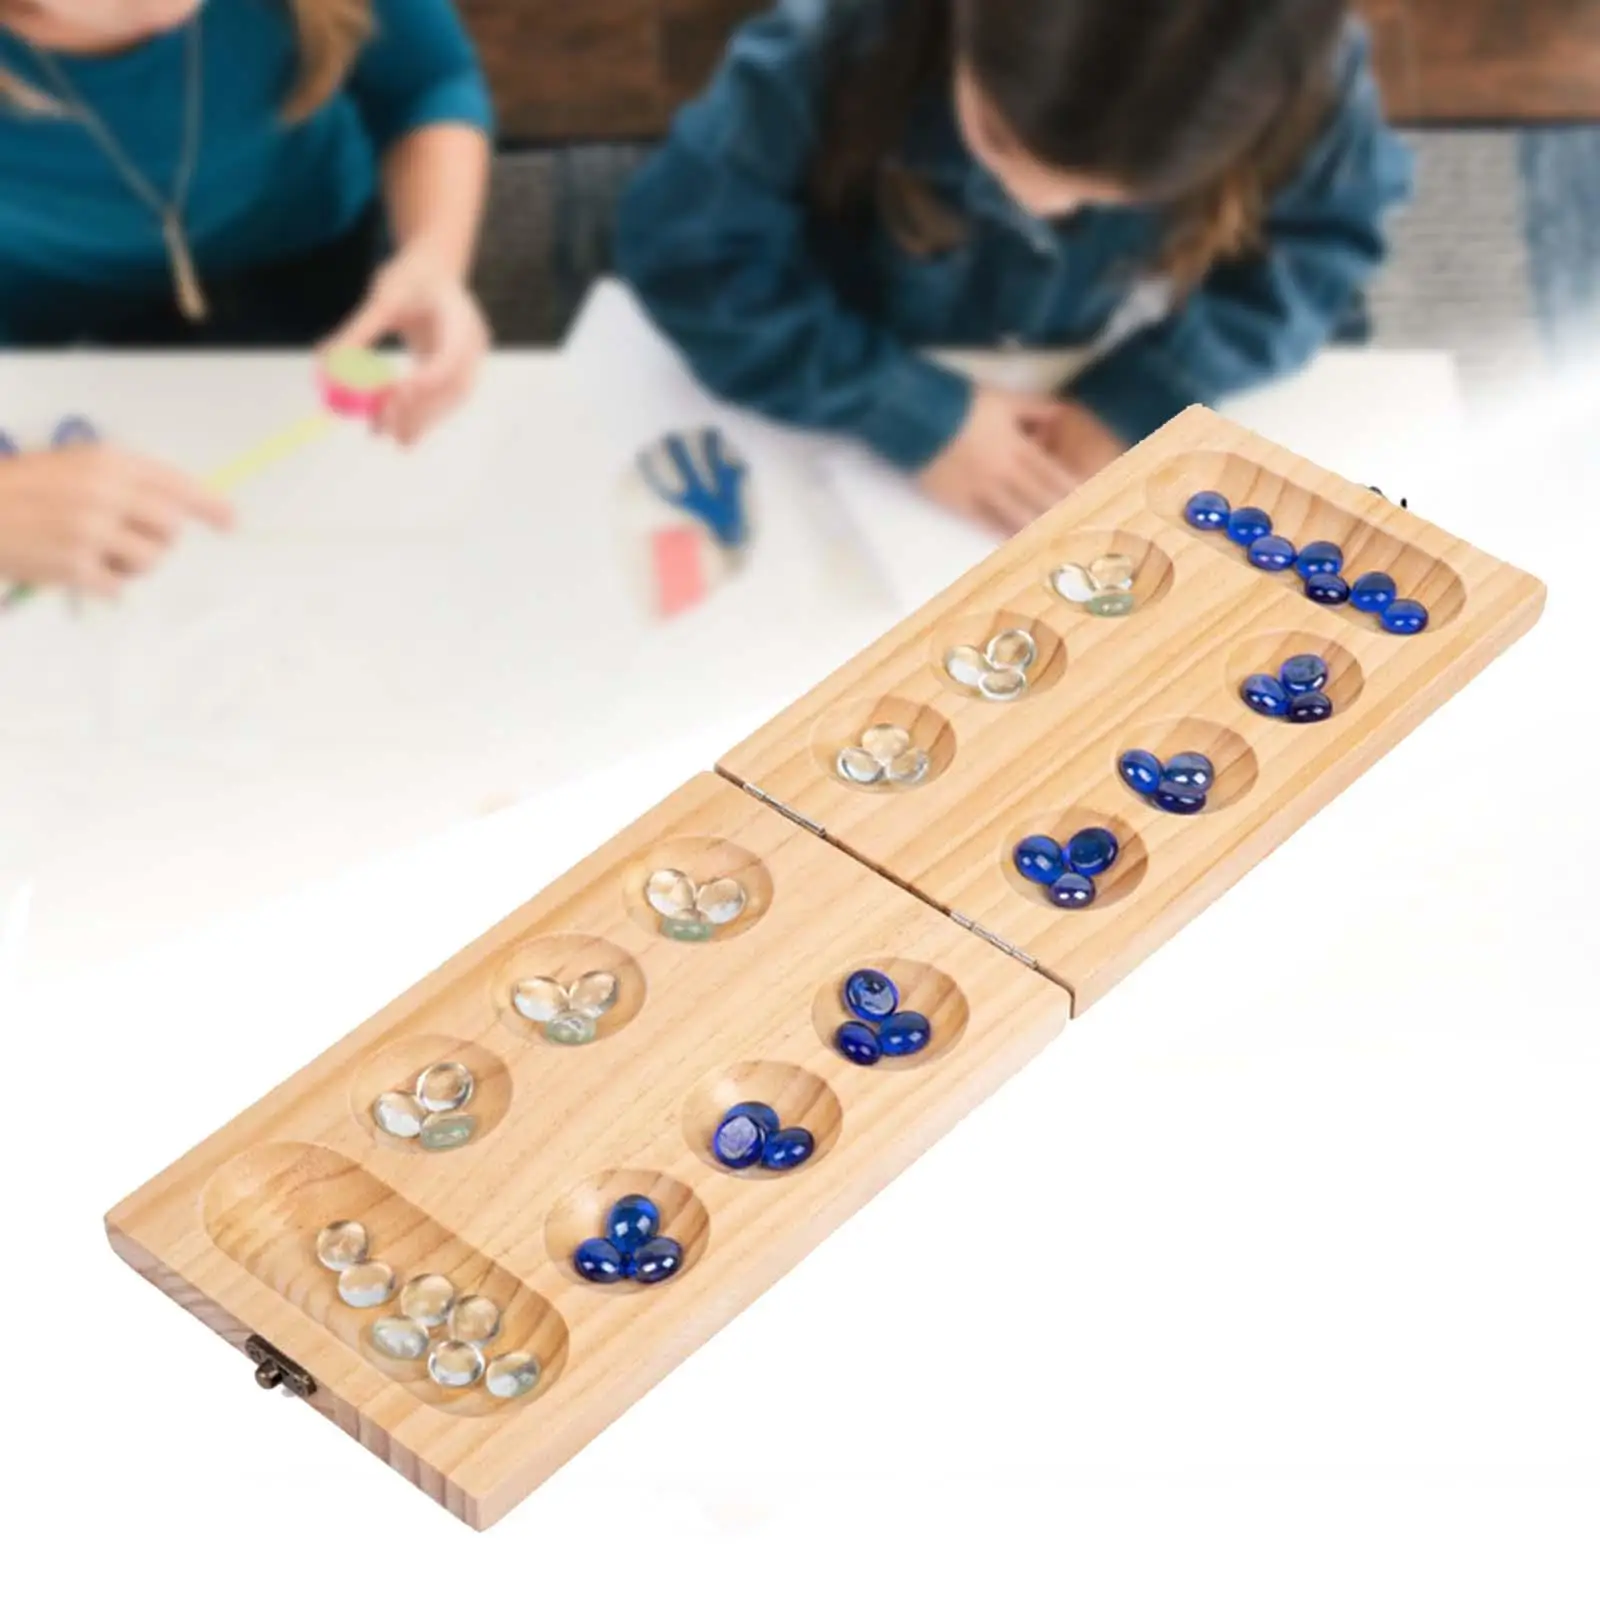 Wooden Mancala Board Game Strategy Game Children and Adults Travel Games